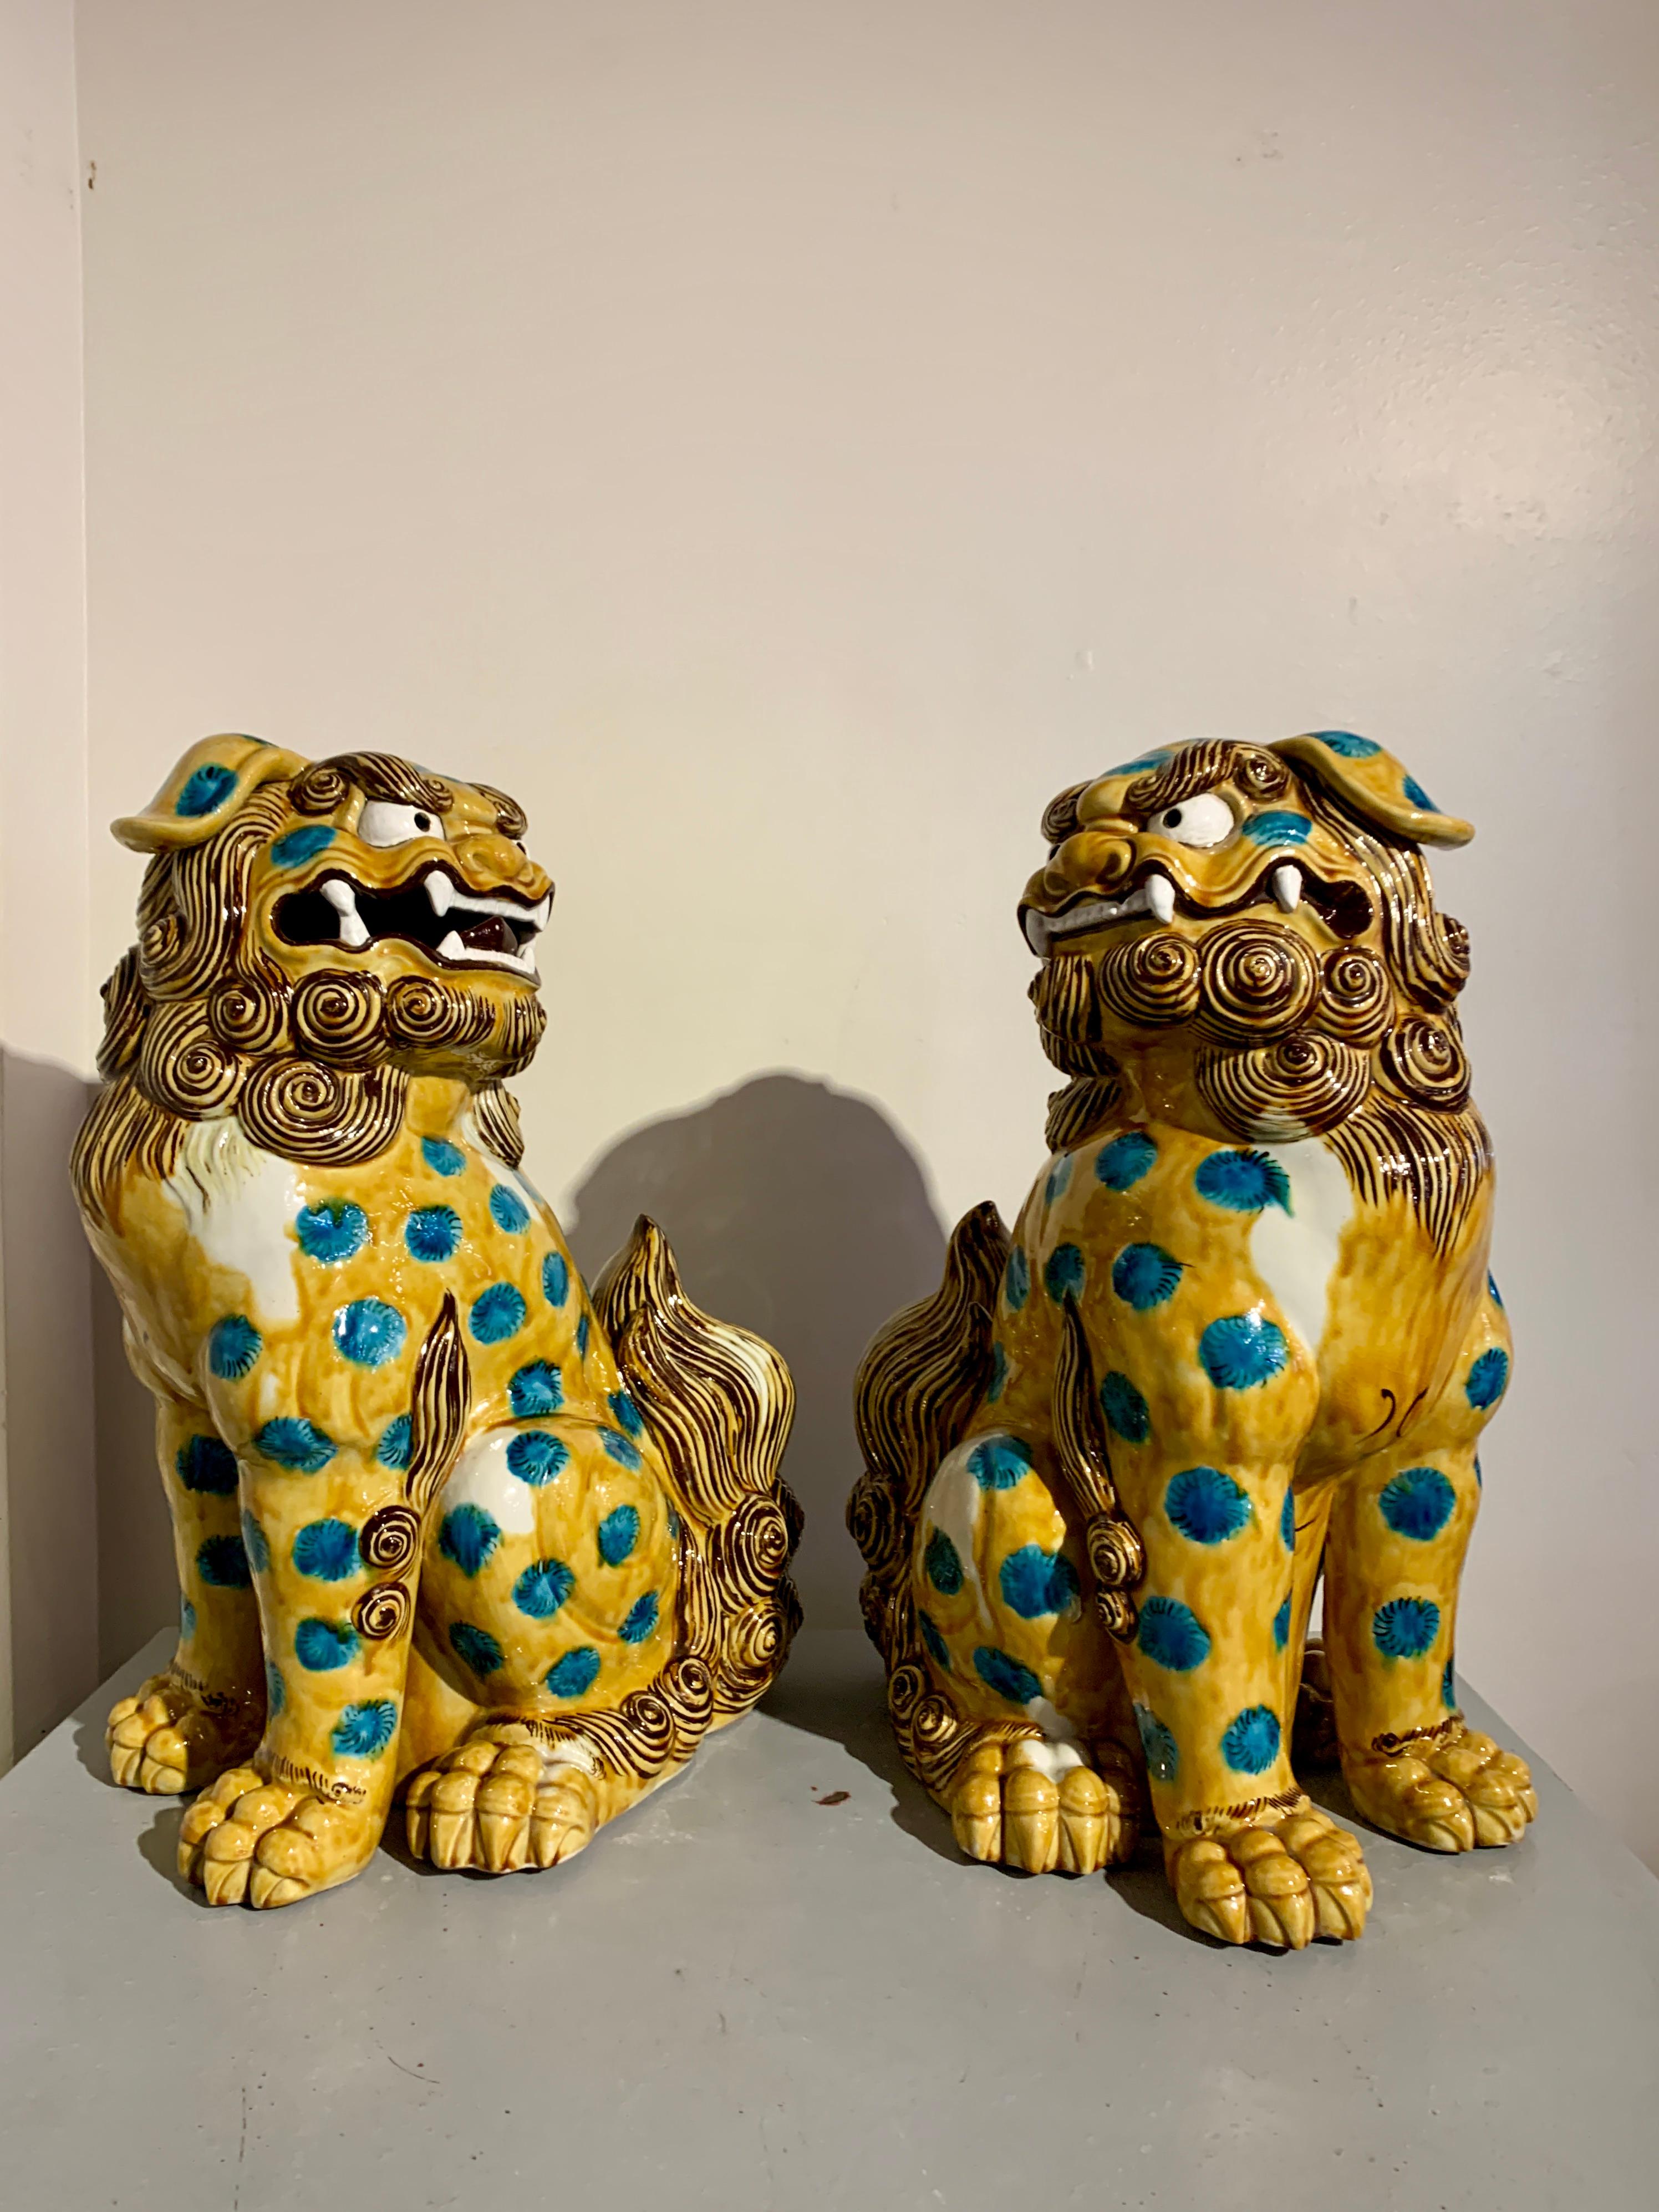 A large and fabulous pair of Japanese yellow glazed Kutani style porcelain lion-dogs, komainu, Showa Era, circa 1960's, Japan.

The delightfully ferocious pair of glazed porcelain komainu are portrayed seated upon their haunches with their heads